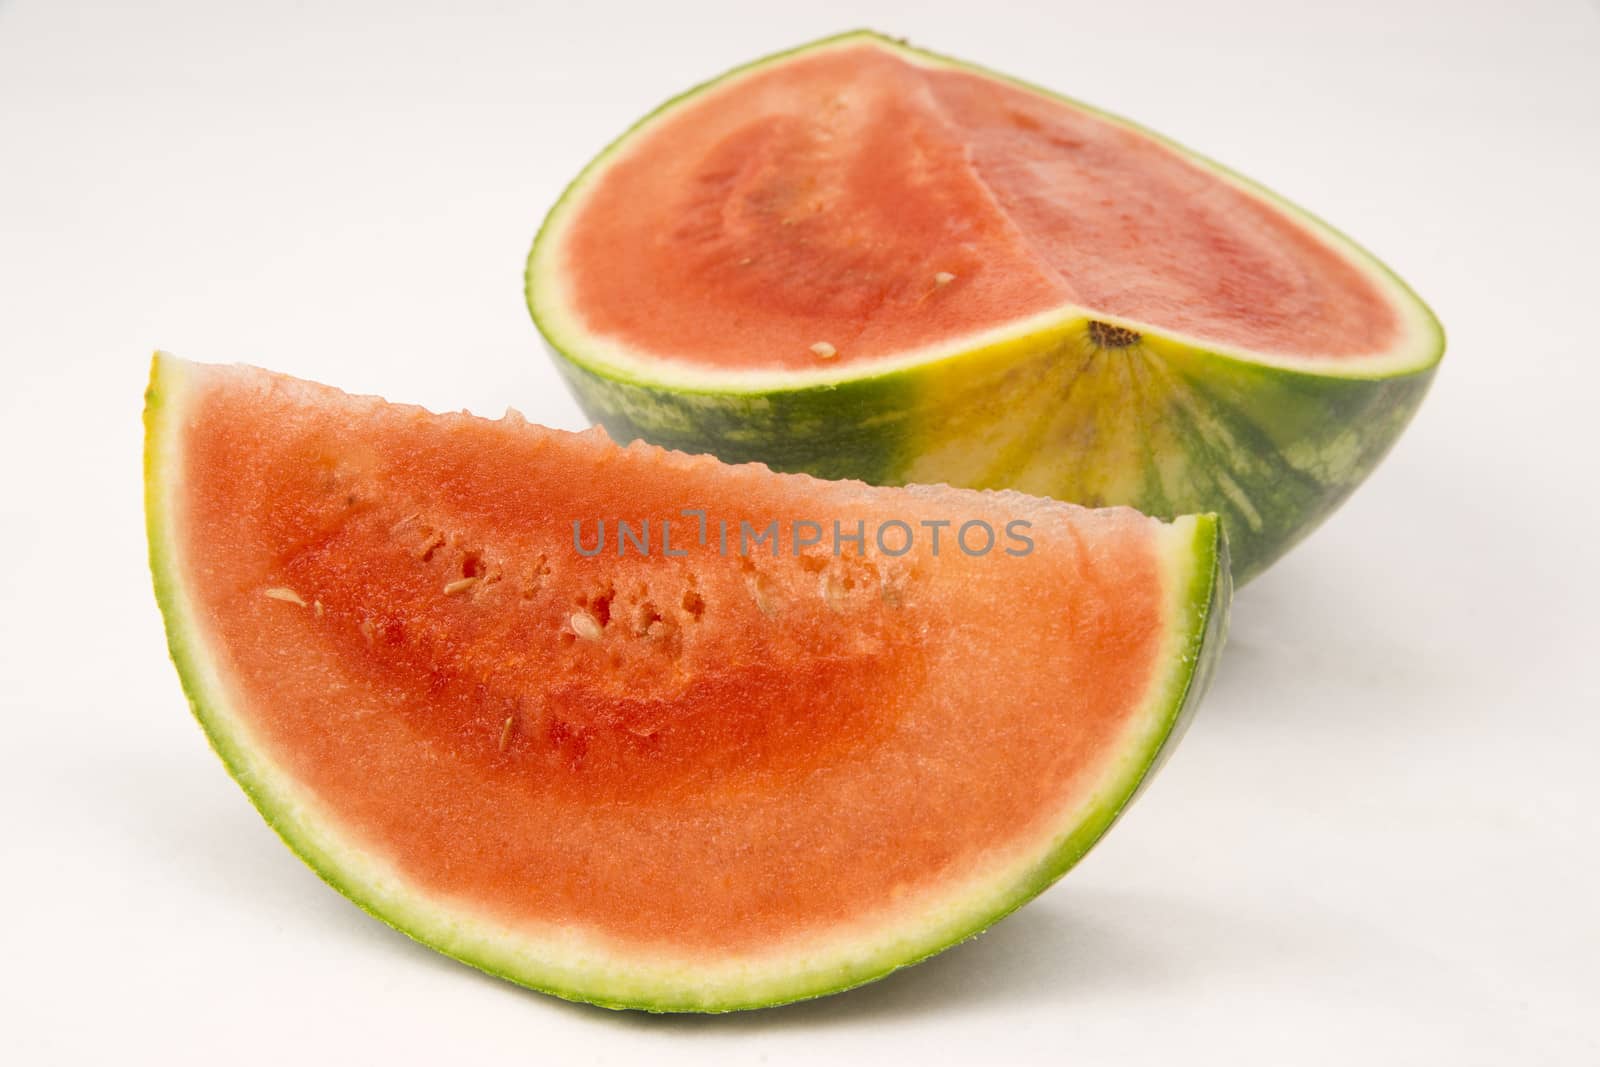 Watermelon Slices Large Melon Fruit  by ChrisBoswell